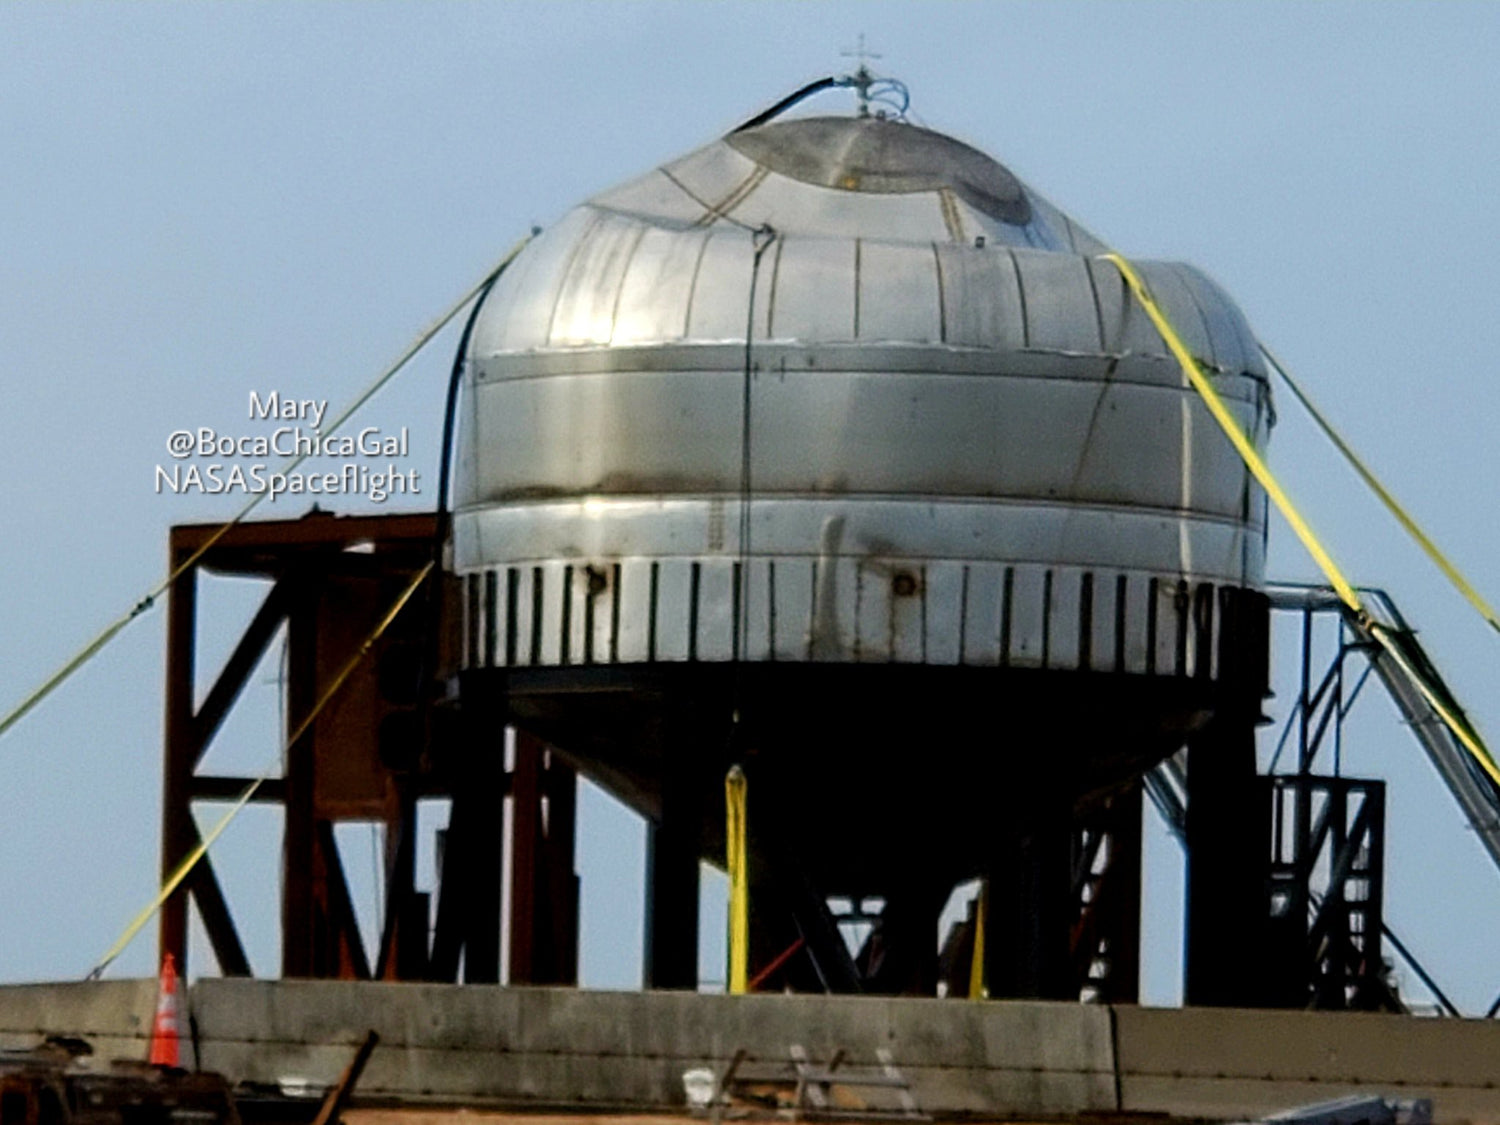 SpaceX conducted a pressure test on a Starship dome tank at Boca Chica today